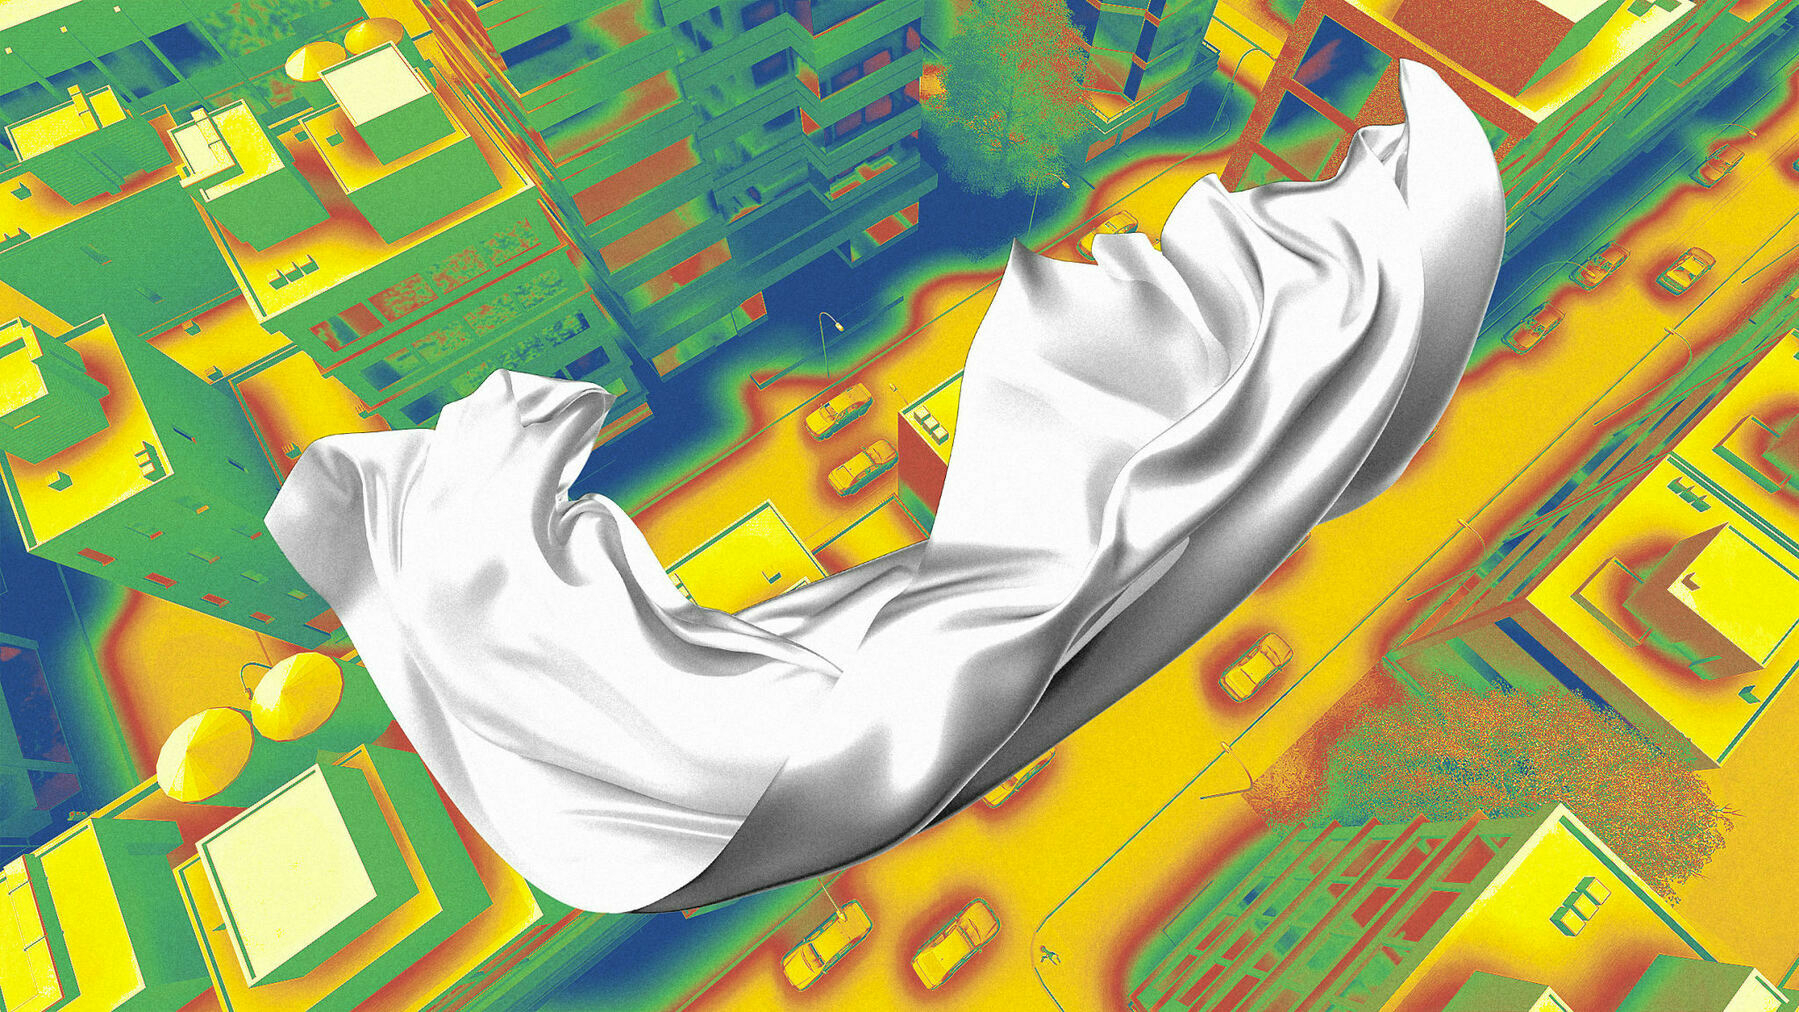 A floating white fabric over a colorfully edited aerial view of an urban area with green buildings.